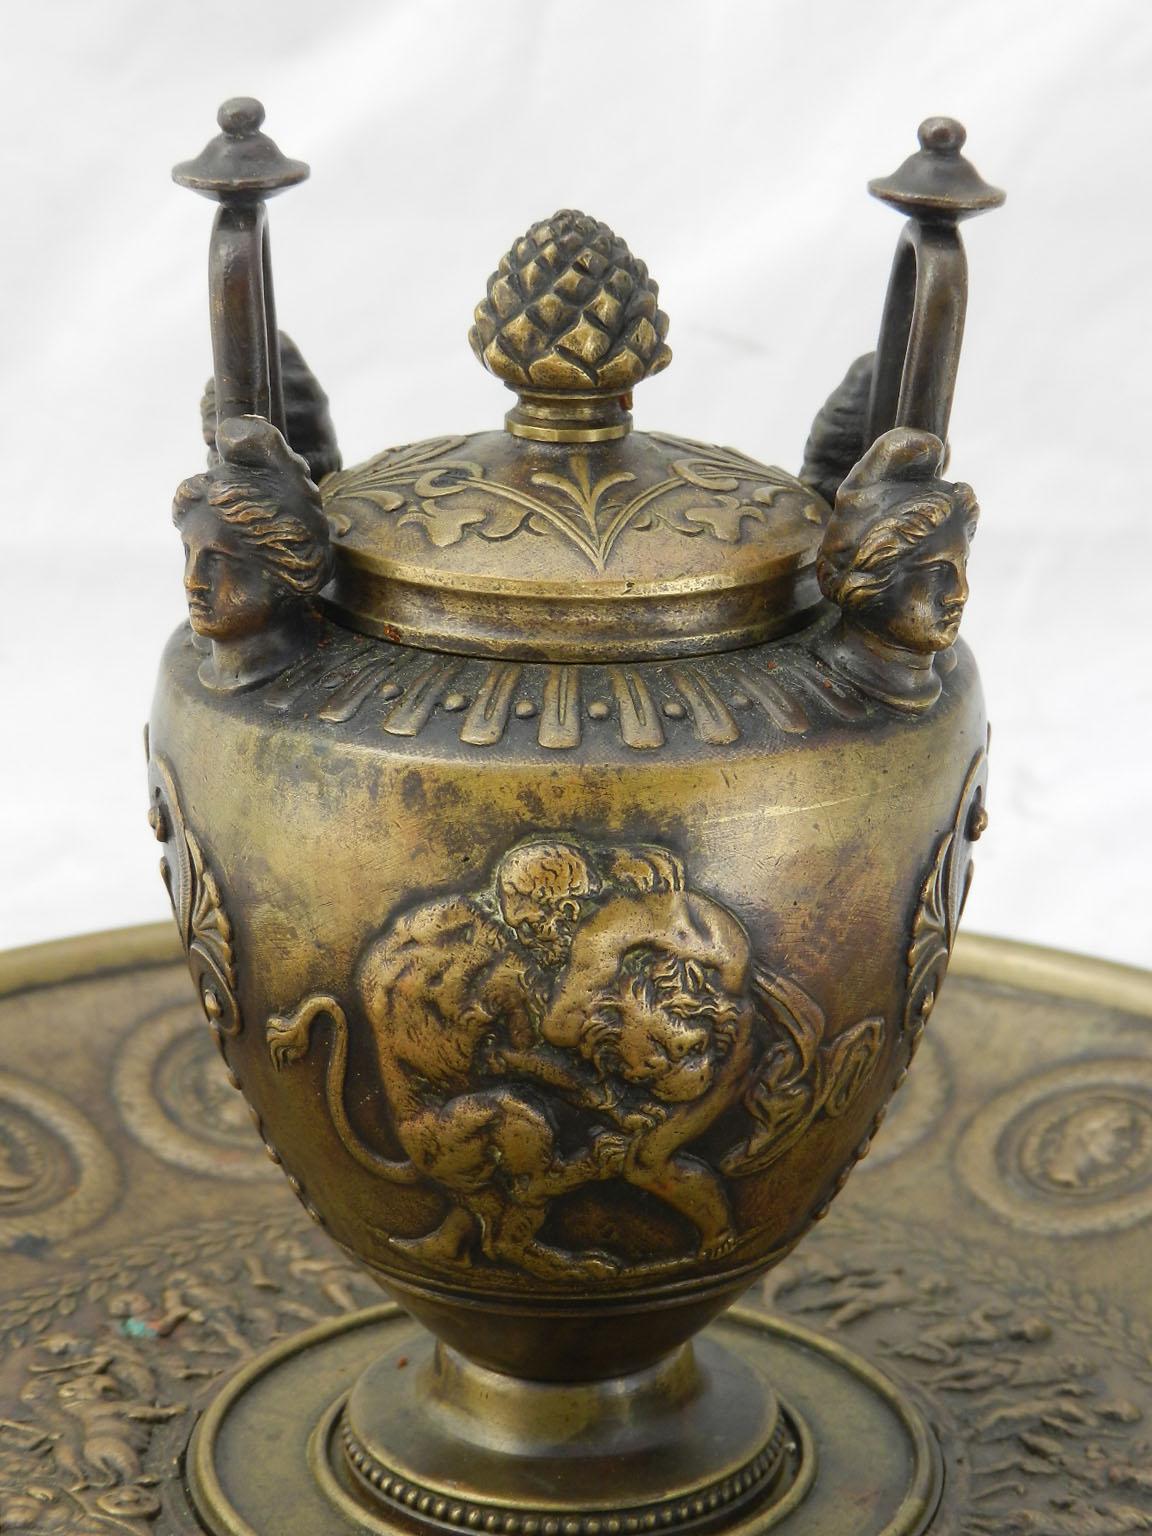 Empire bronze inkwell writing set 19th century
Greek mythology hercules and the lion
Unusual
Original glass liner
Bronze with good patina.







   